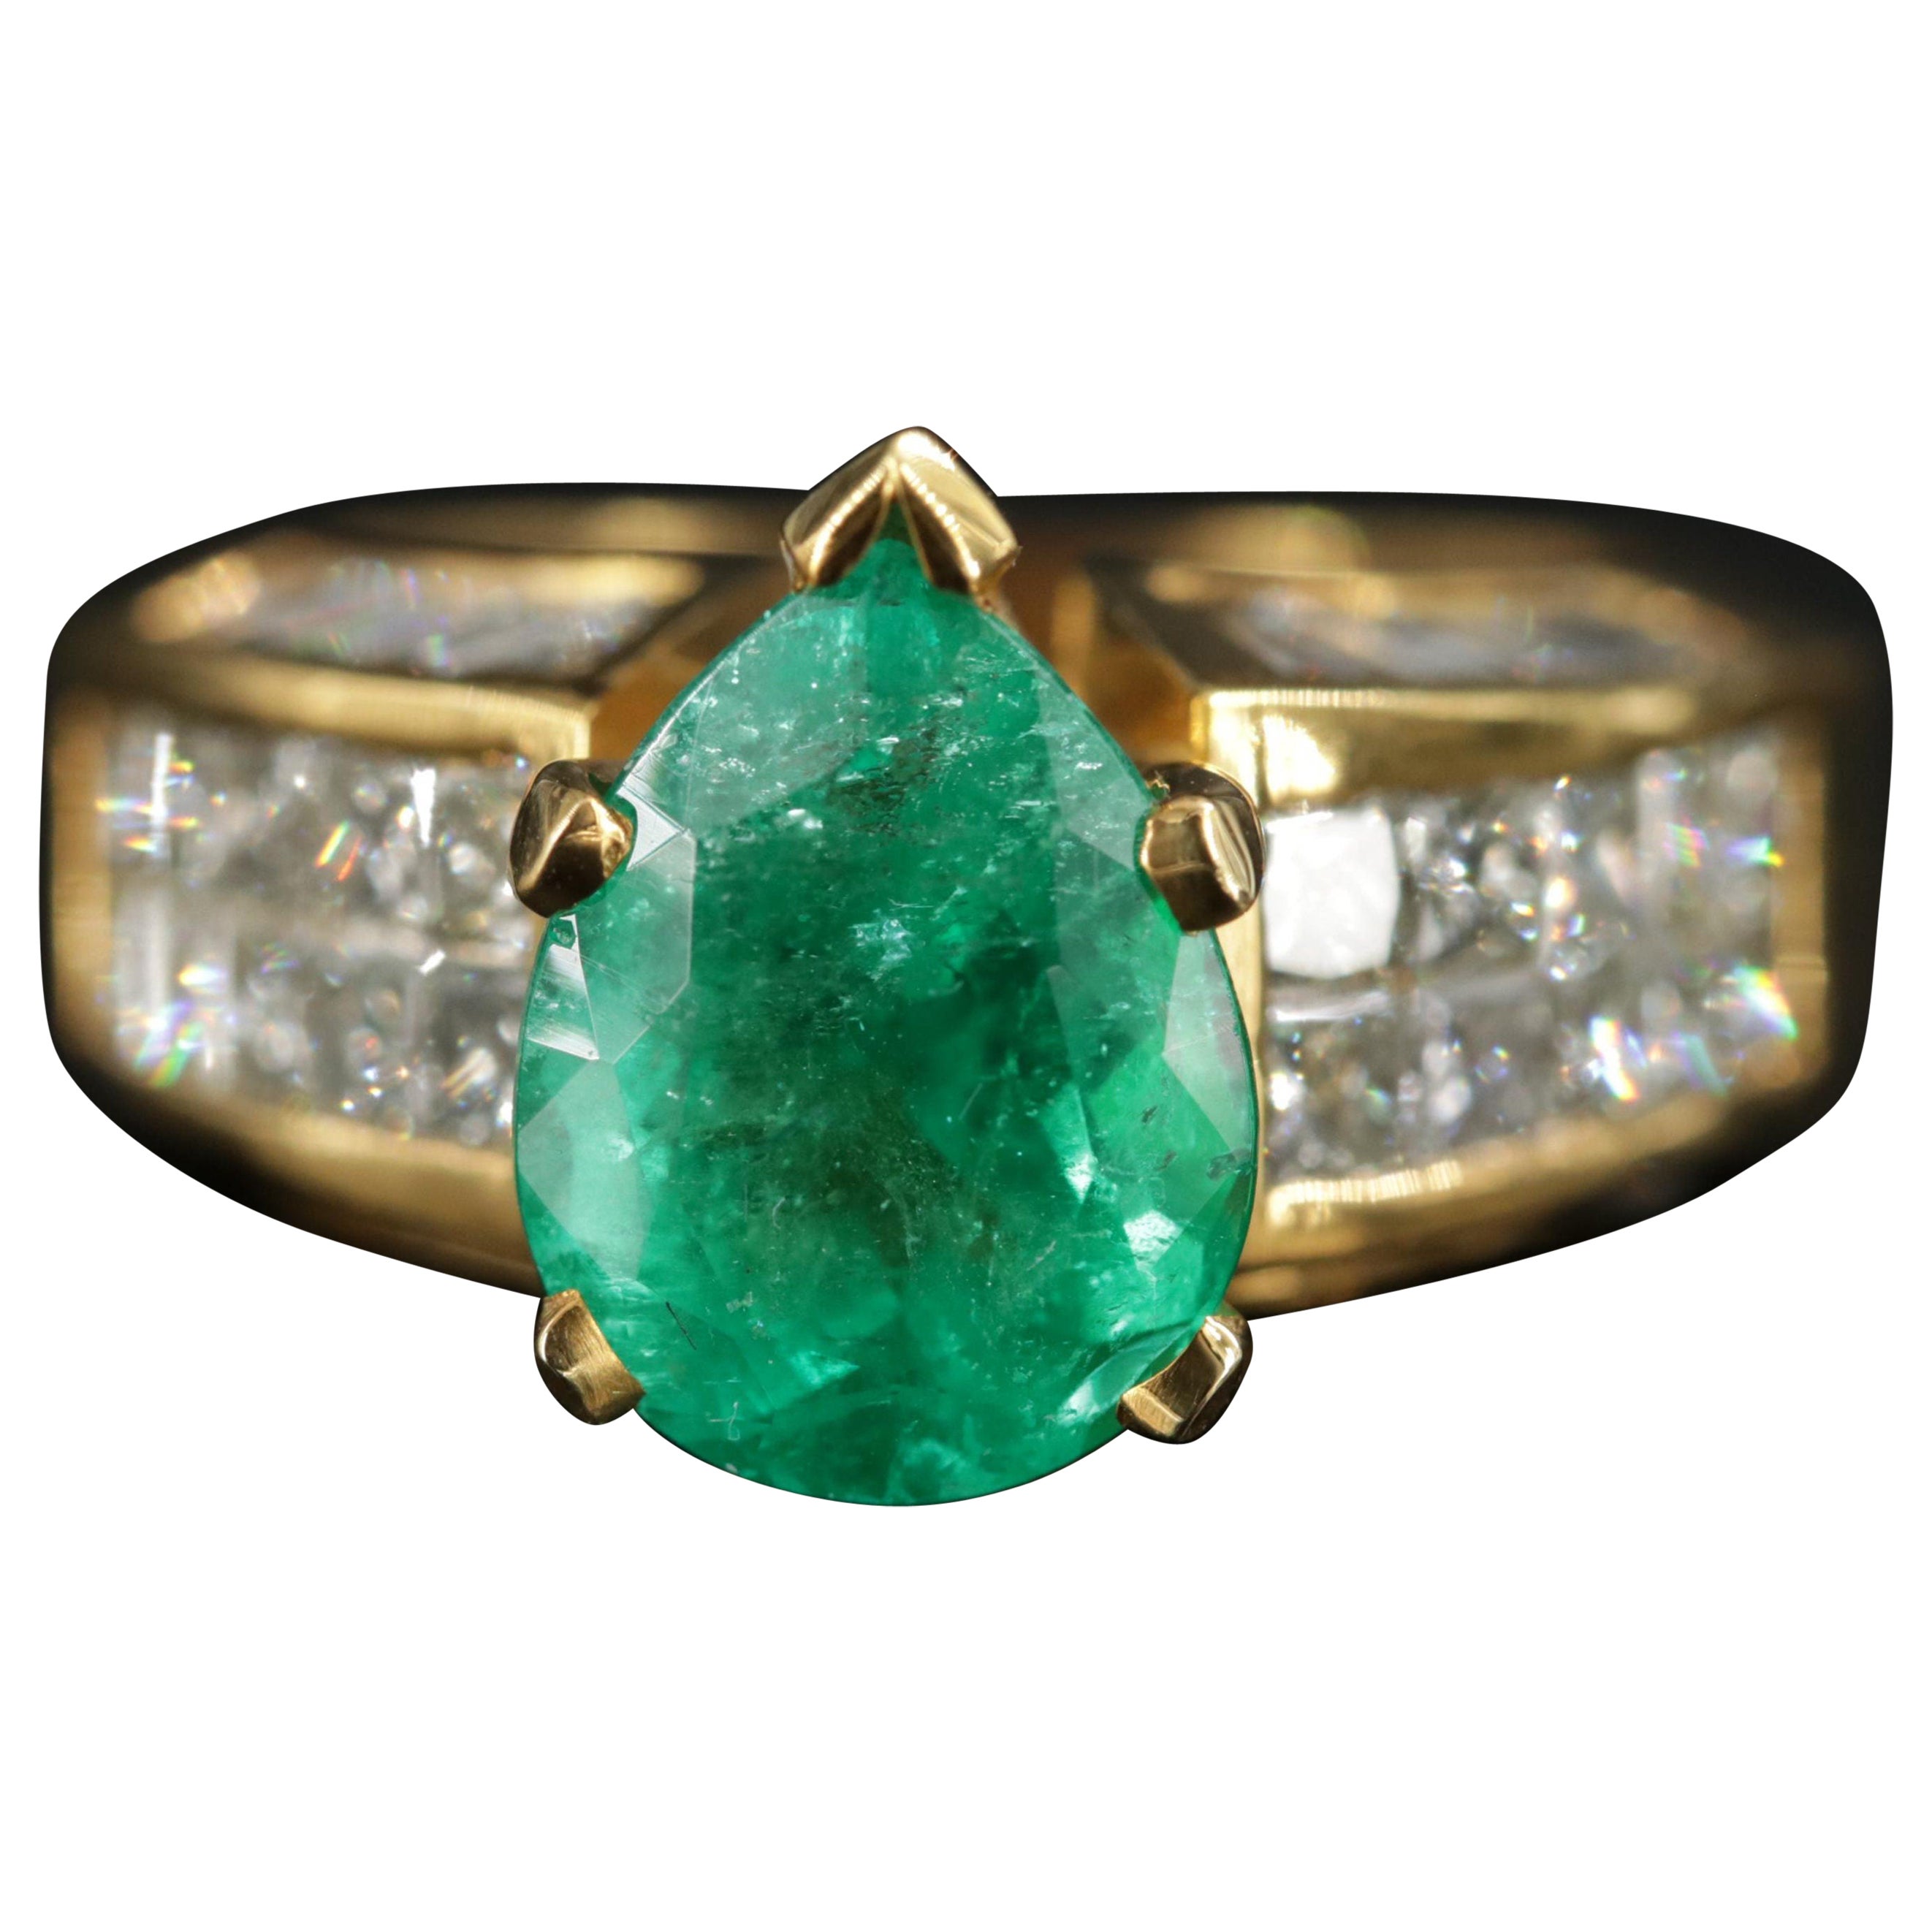 For Sale:  3.32 Carat Pear Cut Emerald Diamond Engagement Wedding Ring Yellow Gold Ring